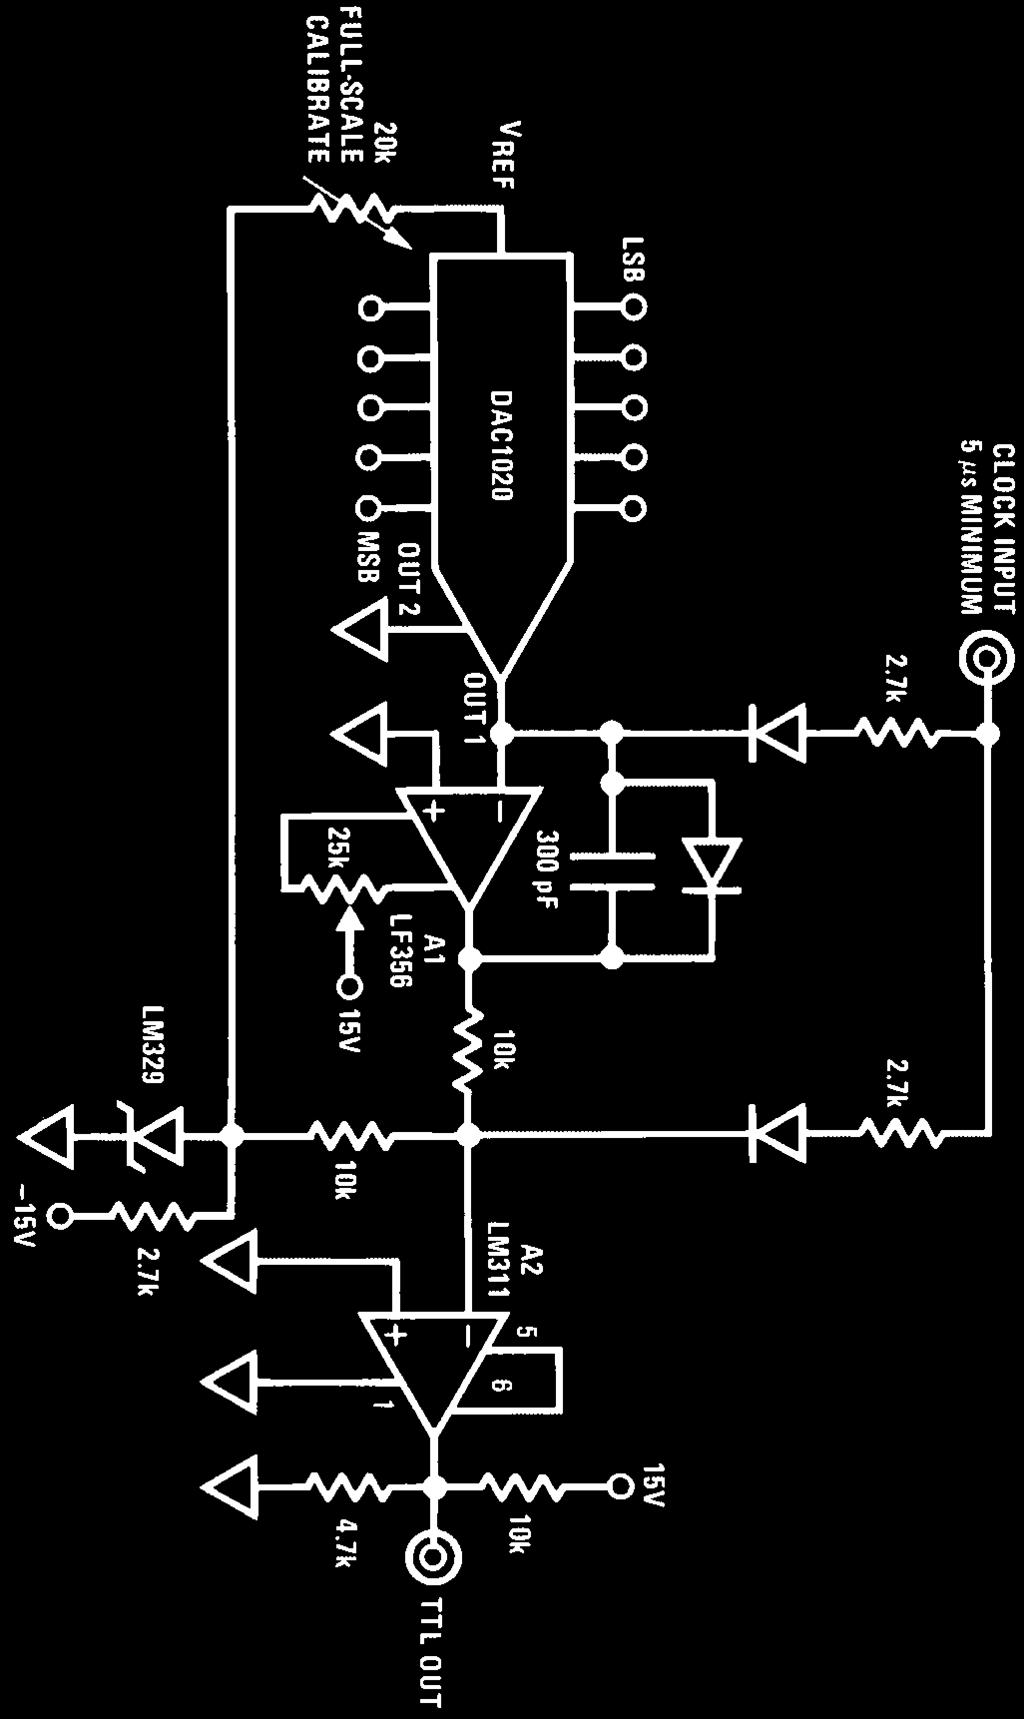 In this circuit the length of time the A1 integrator requires to charge to a reference level is determined by the current coming out of the DAC The DAC output current is directly proportional to the